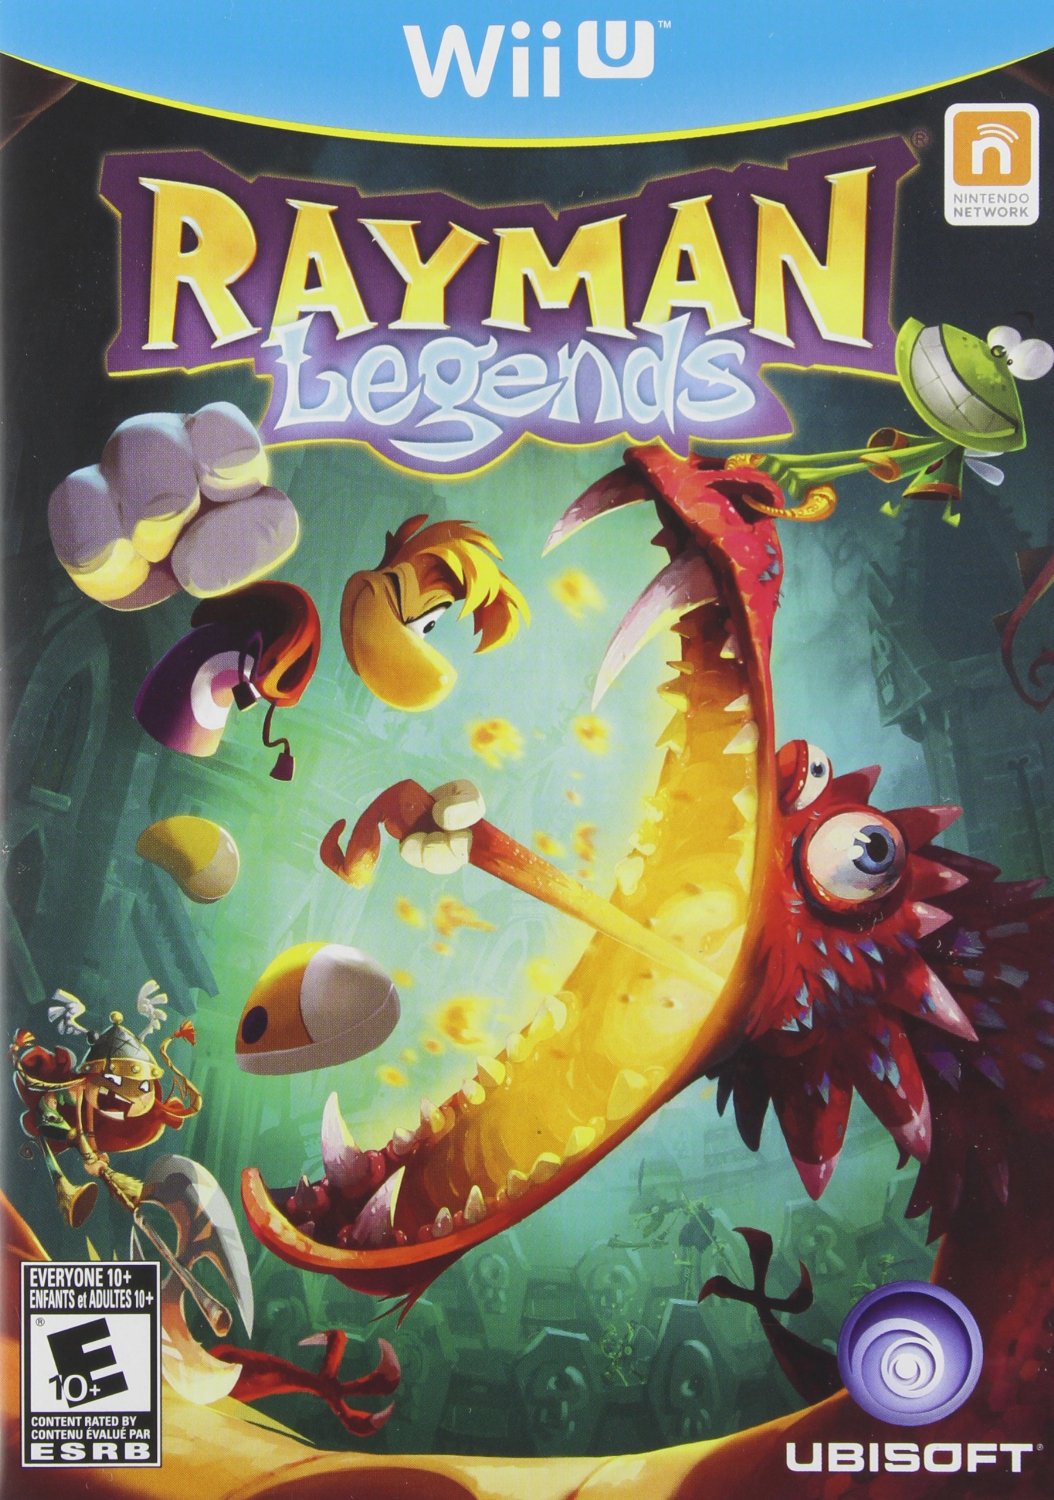 Rayman Legends: Definitive Edition Launches September 12 on